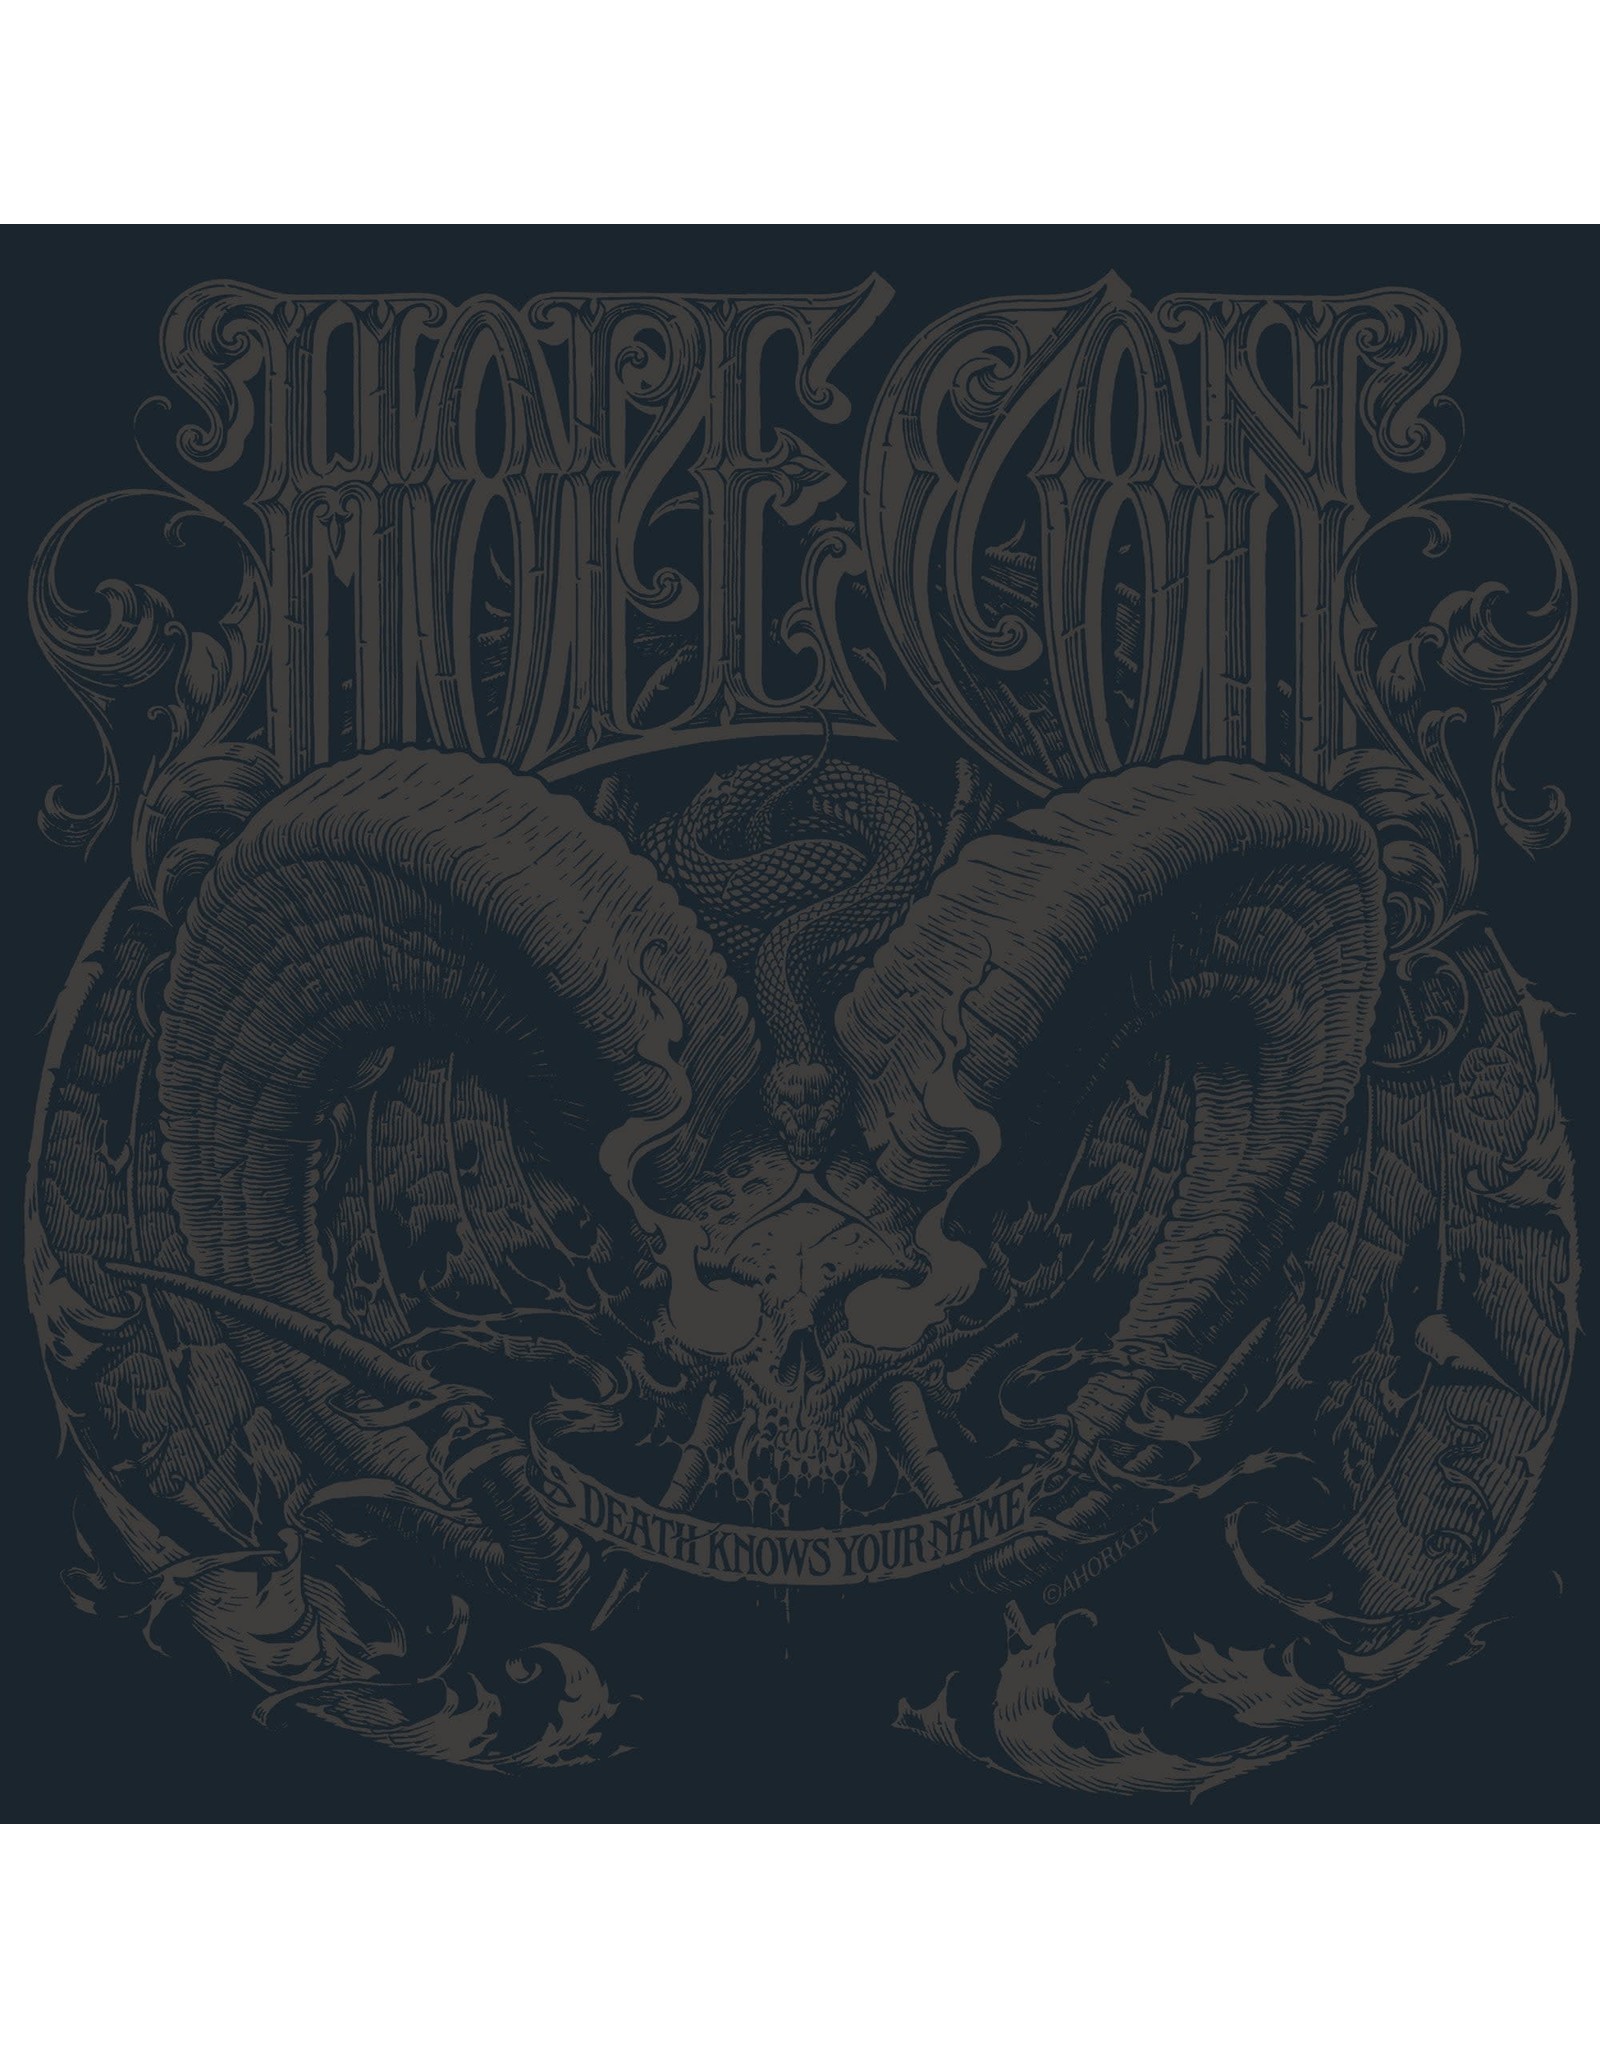 Hope Conspiracy - Death Knows Your Name LP (Gatefold)